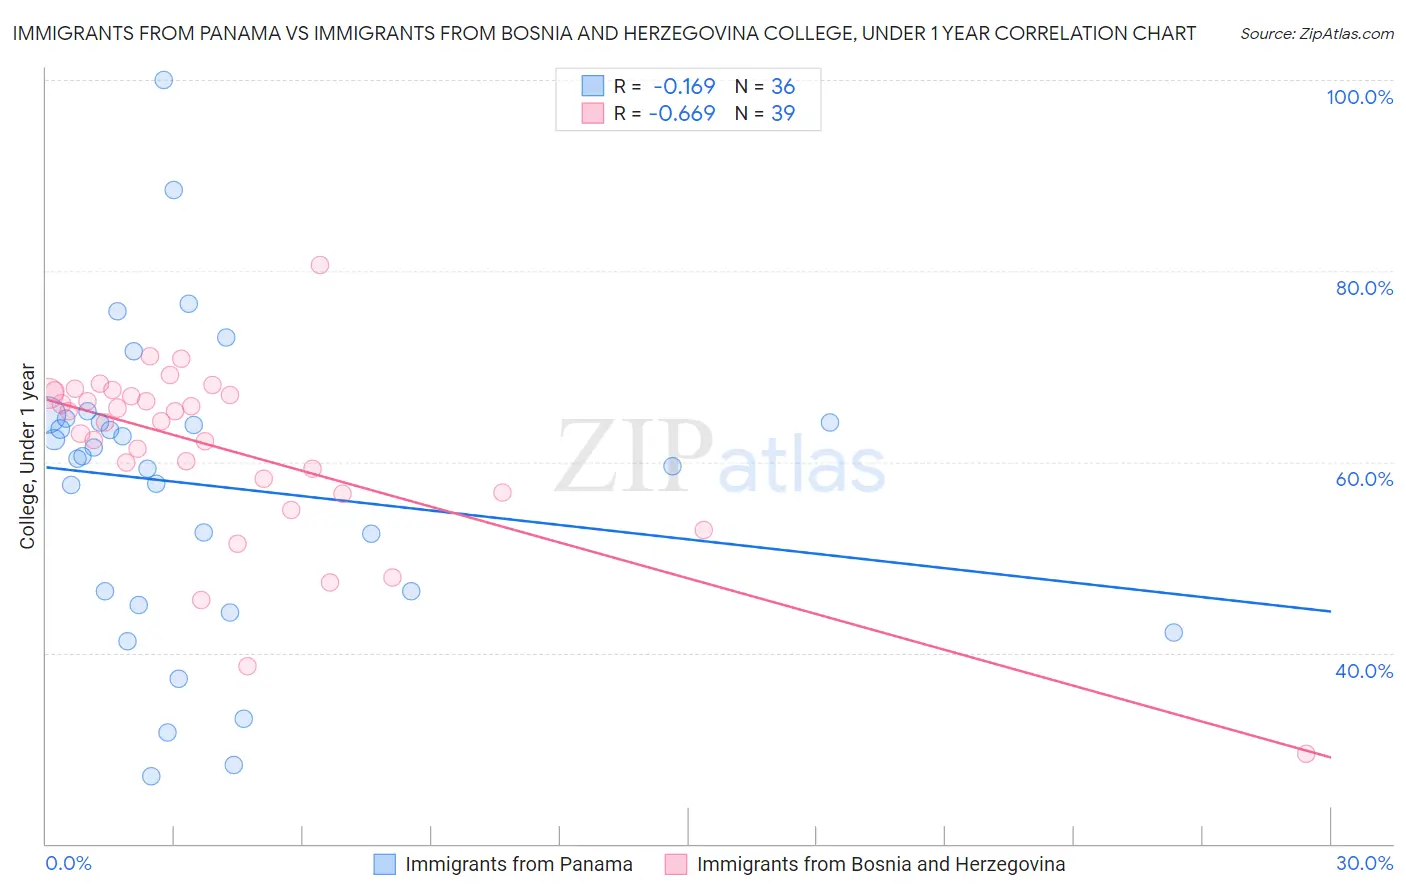 Immigrants from Panama vs Immigrants from Bosnia and Herzegovina College, Under 1 year